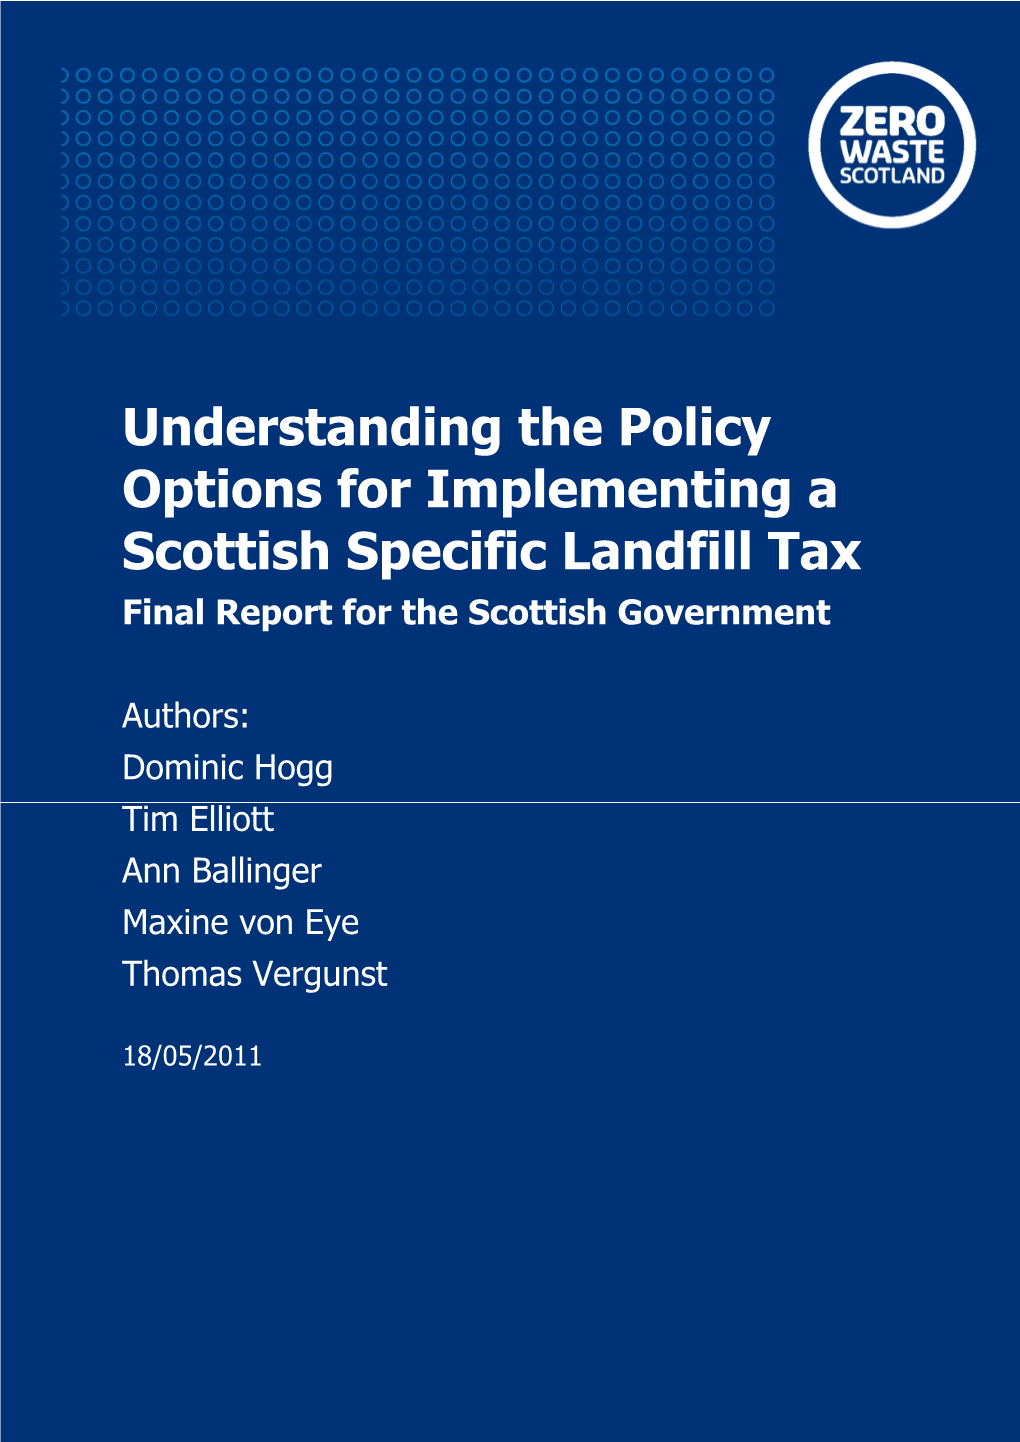 Understanding the Policy Options for Implementing a Scottish Specific Landfill Tax Final Report for the Scottish Government